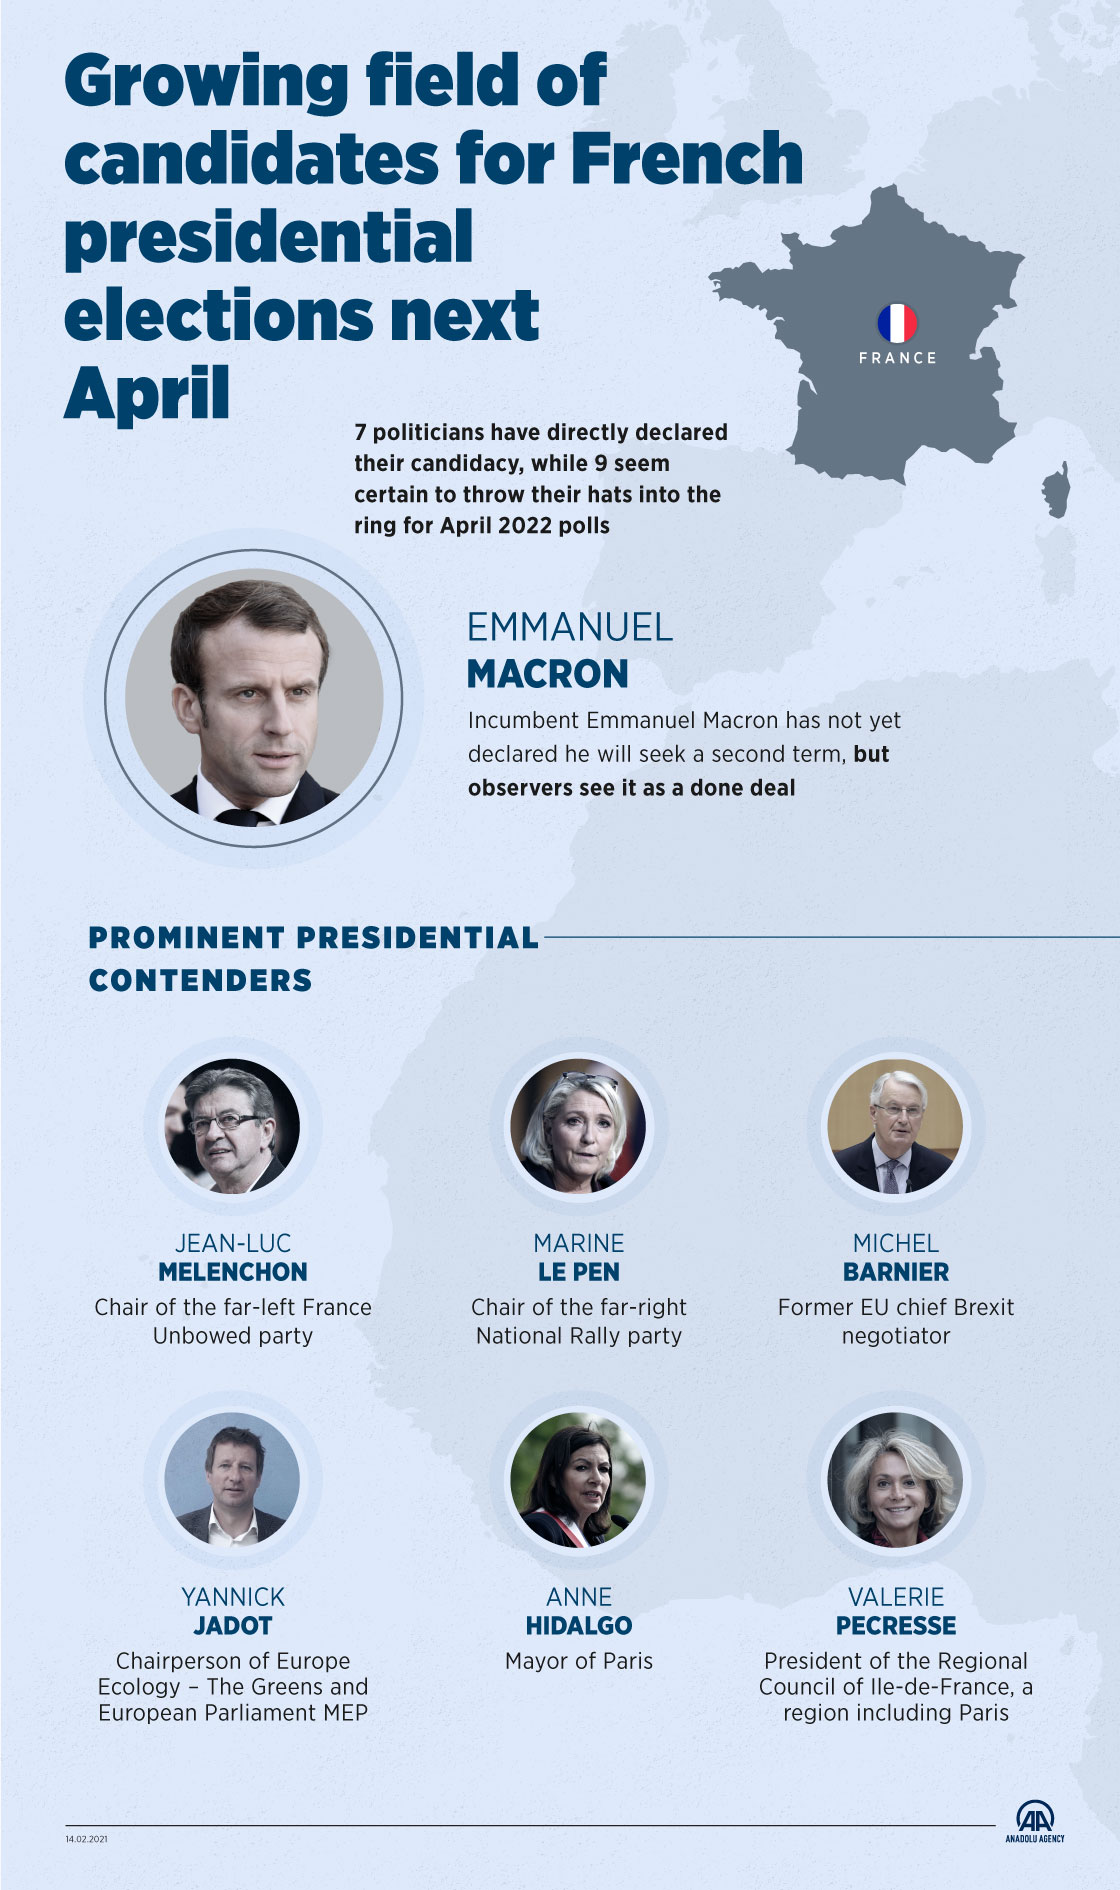 Growing field of candidates for French presidential elections next April